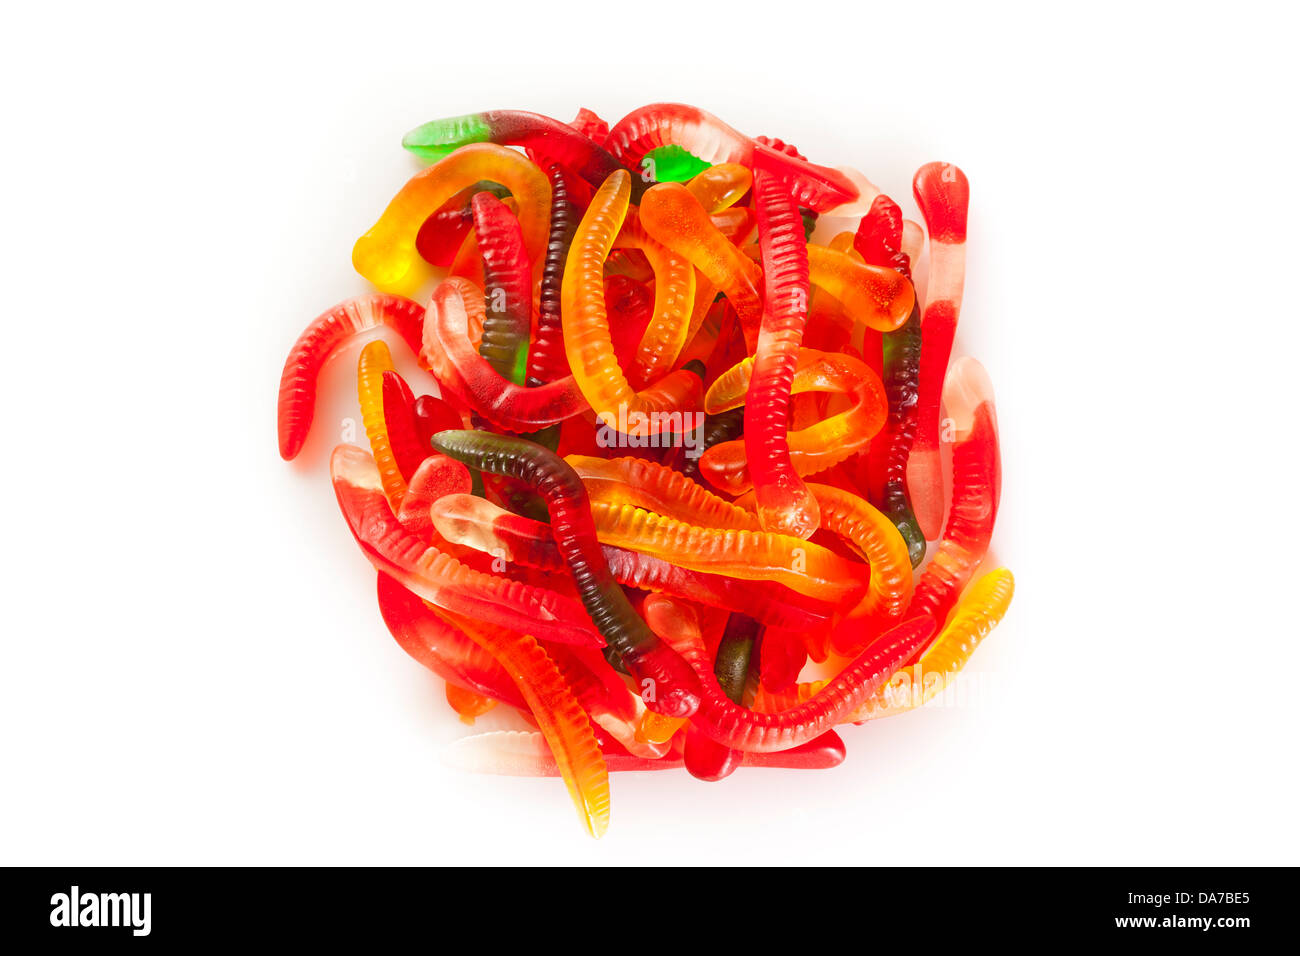 Colorful Fruity Gummy Worm Candy on a background Stock Photo